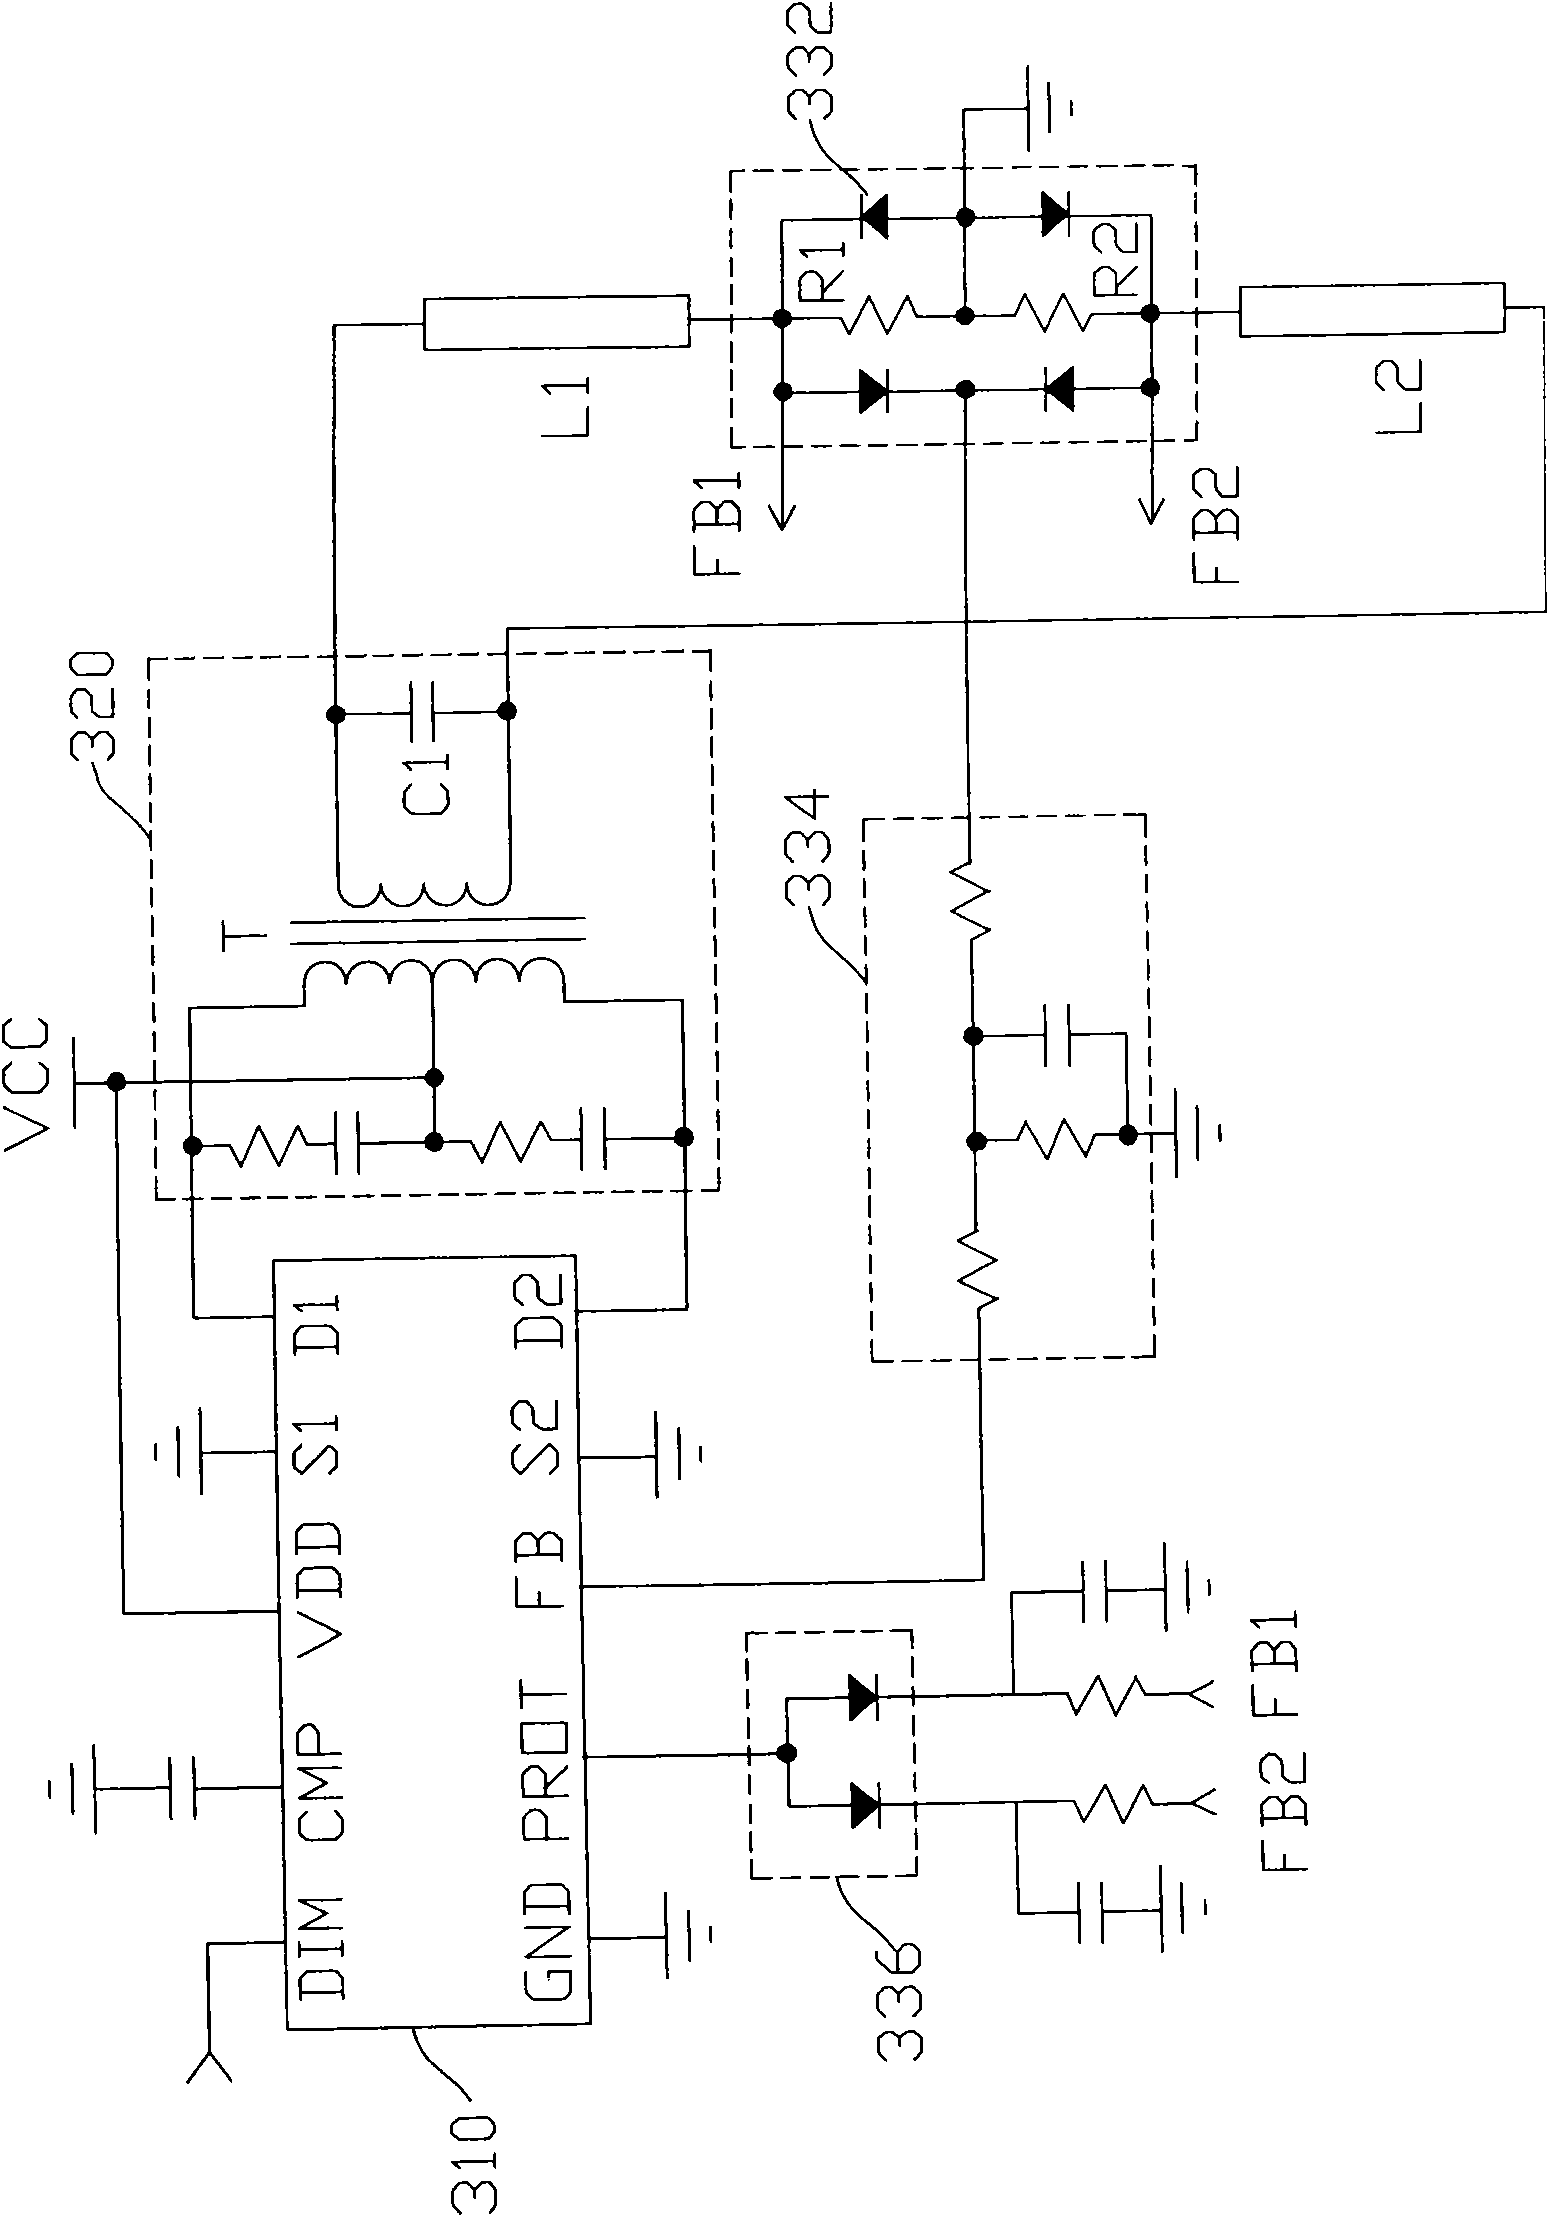 Drive circuit of fluorescent tube